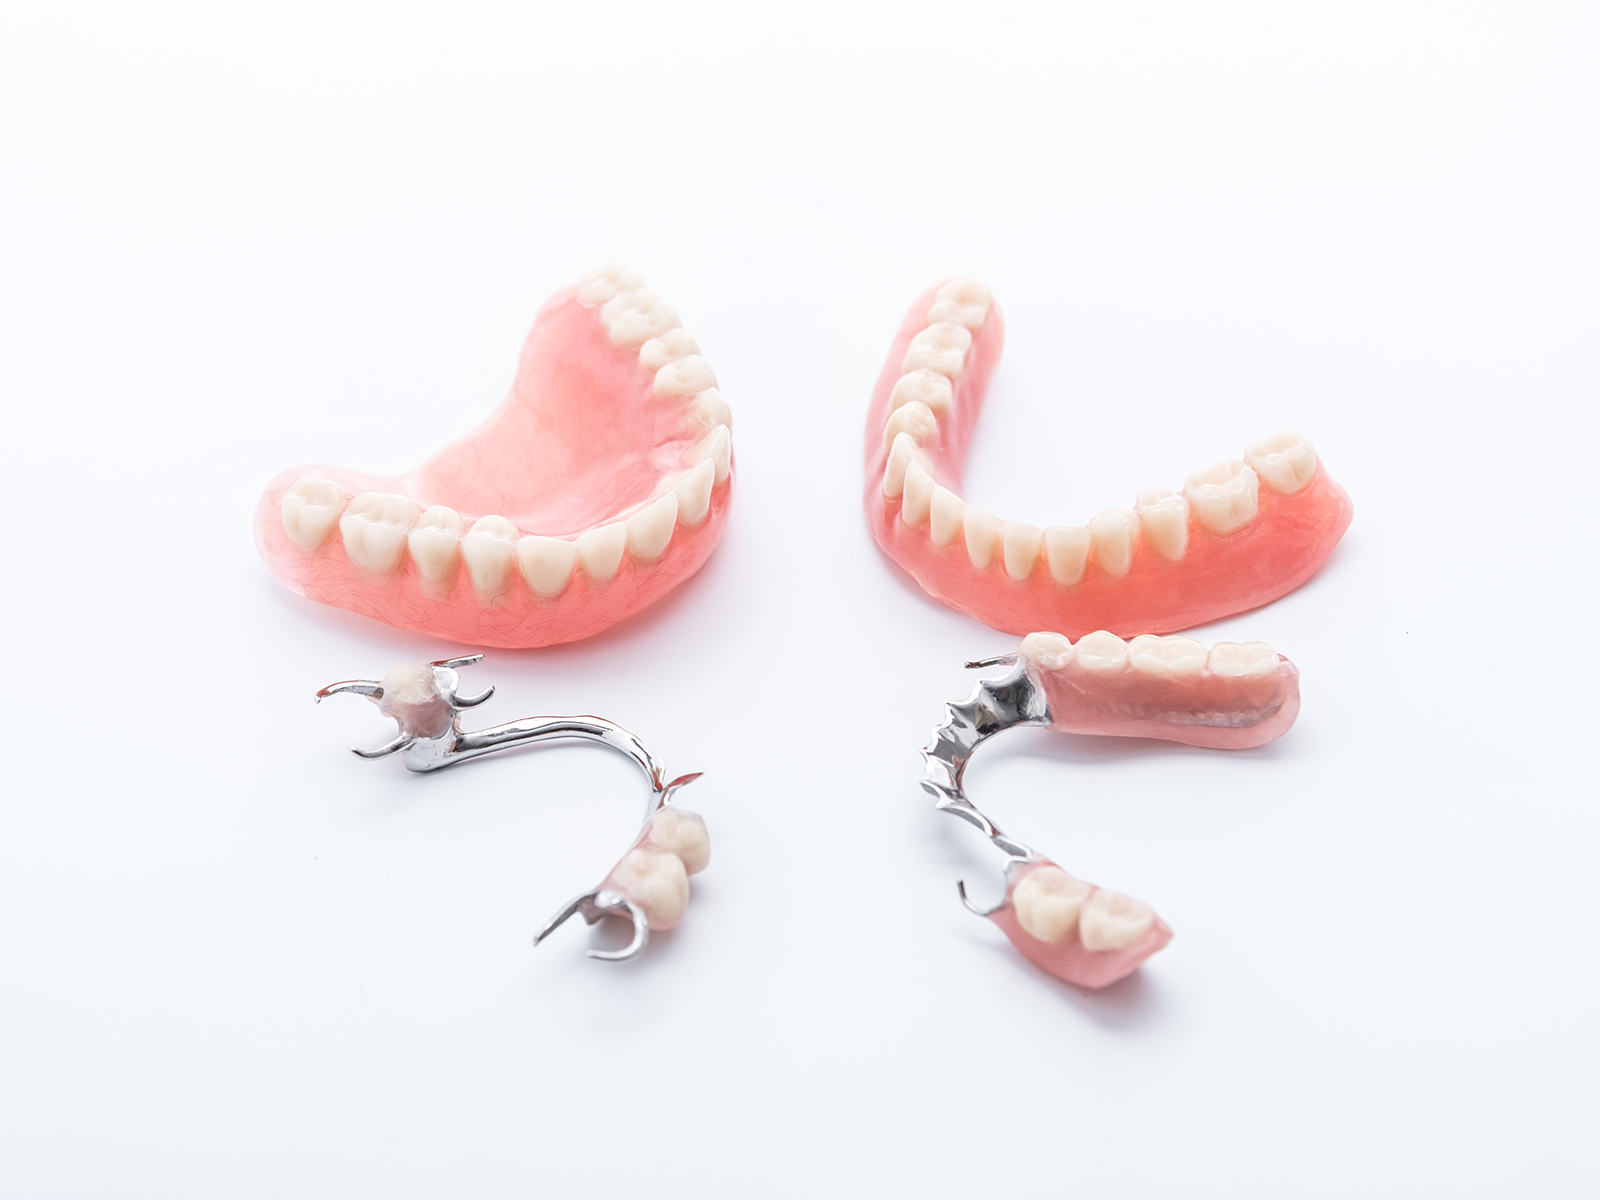 Which is better Porcelain or Plastic Dentures?